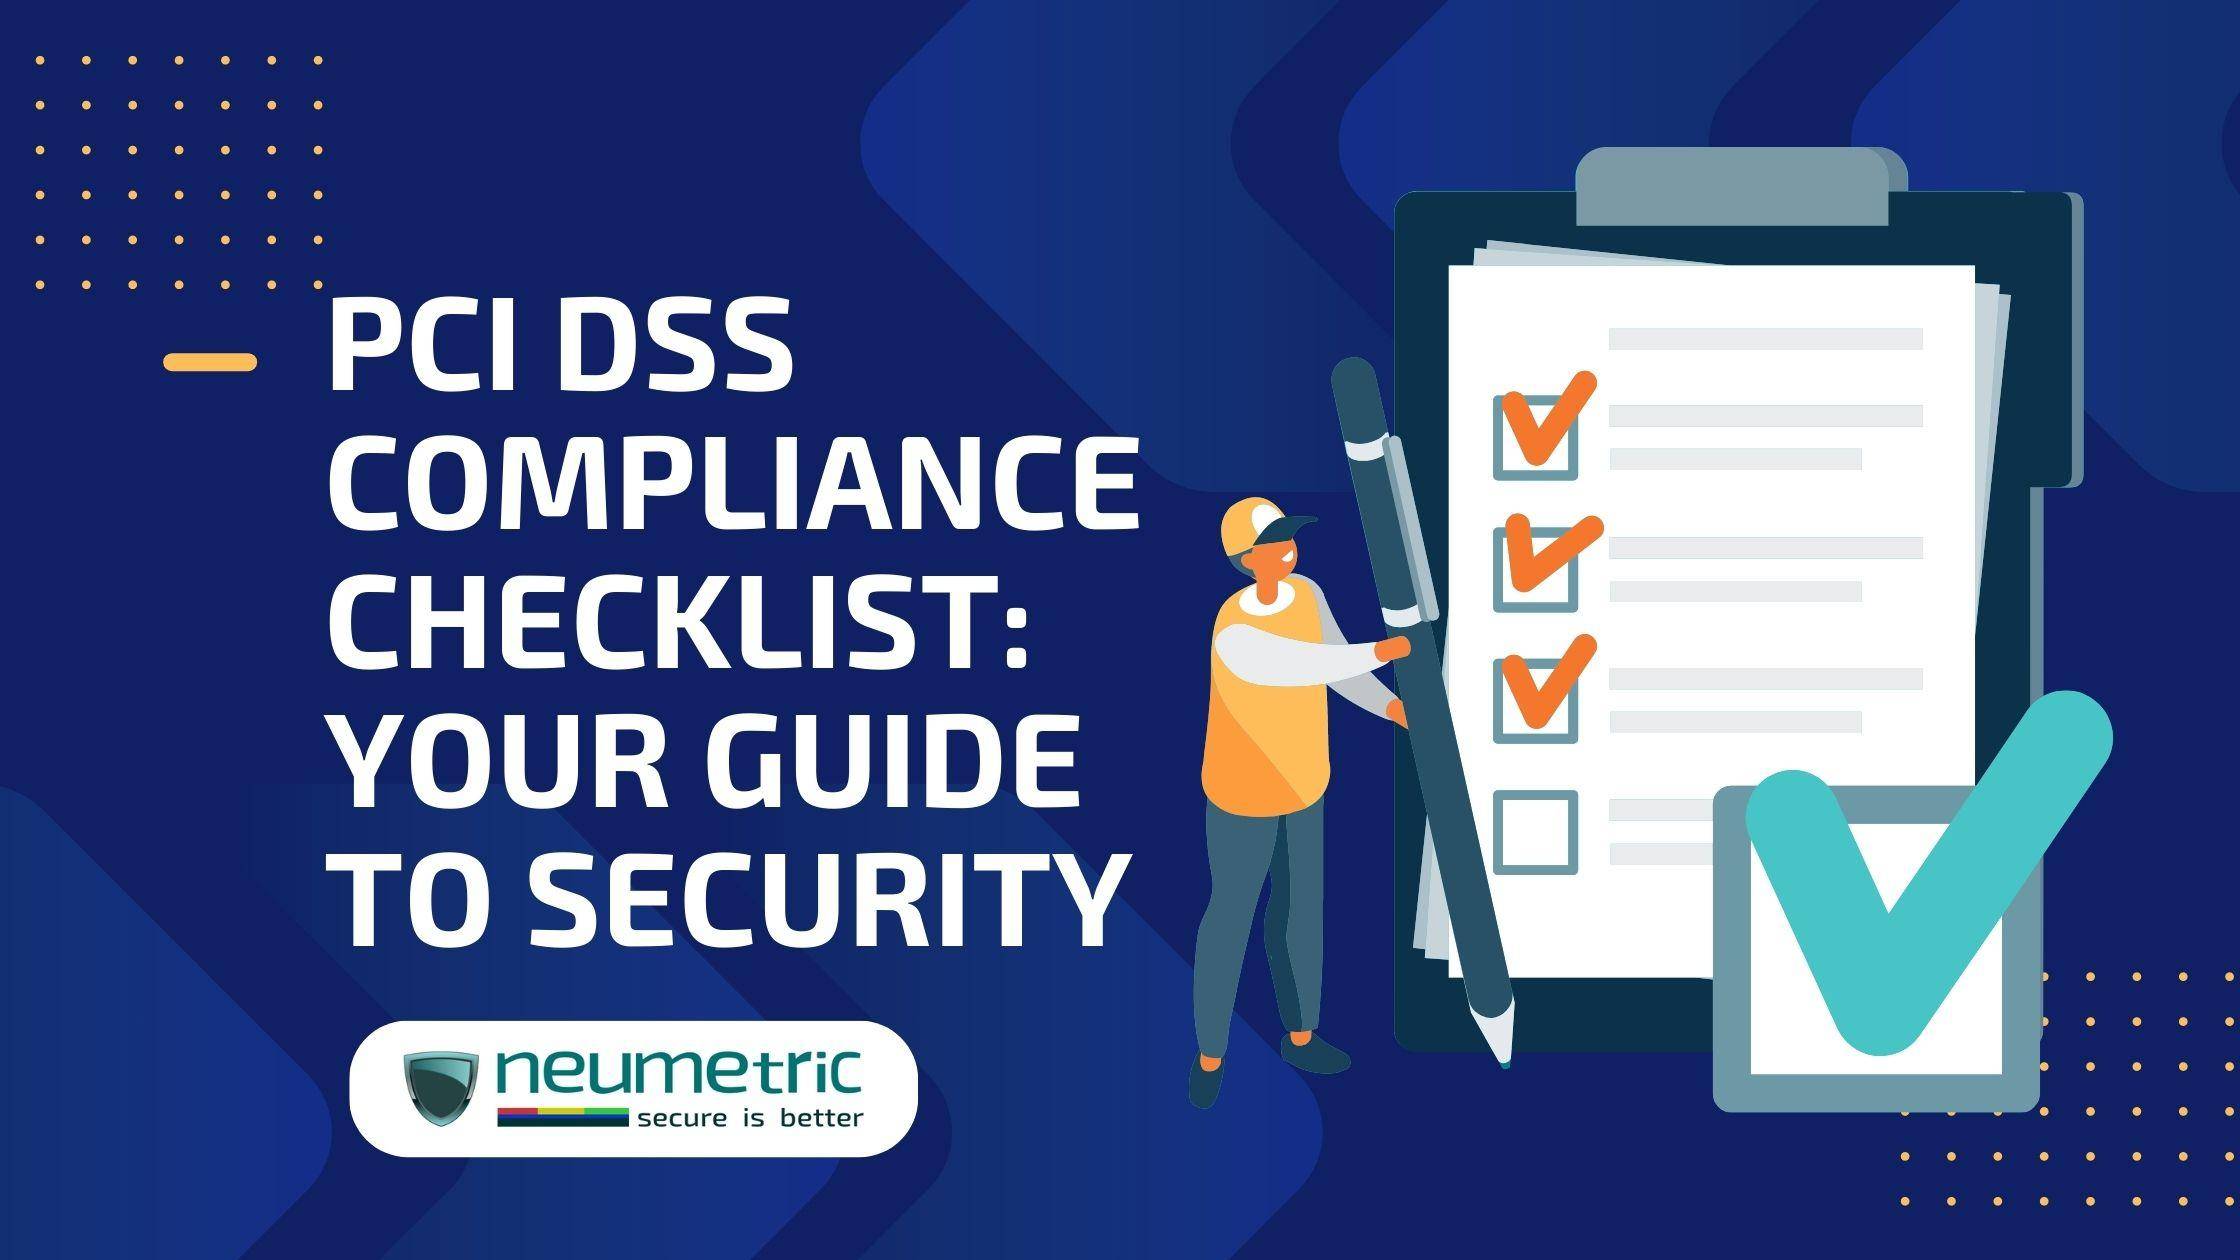 PCI DSS Compliance Checklist – Your Guide to Security